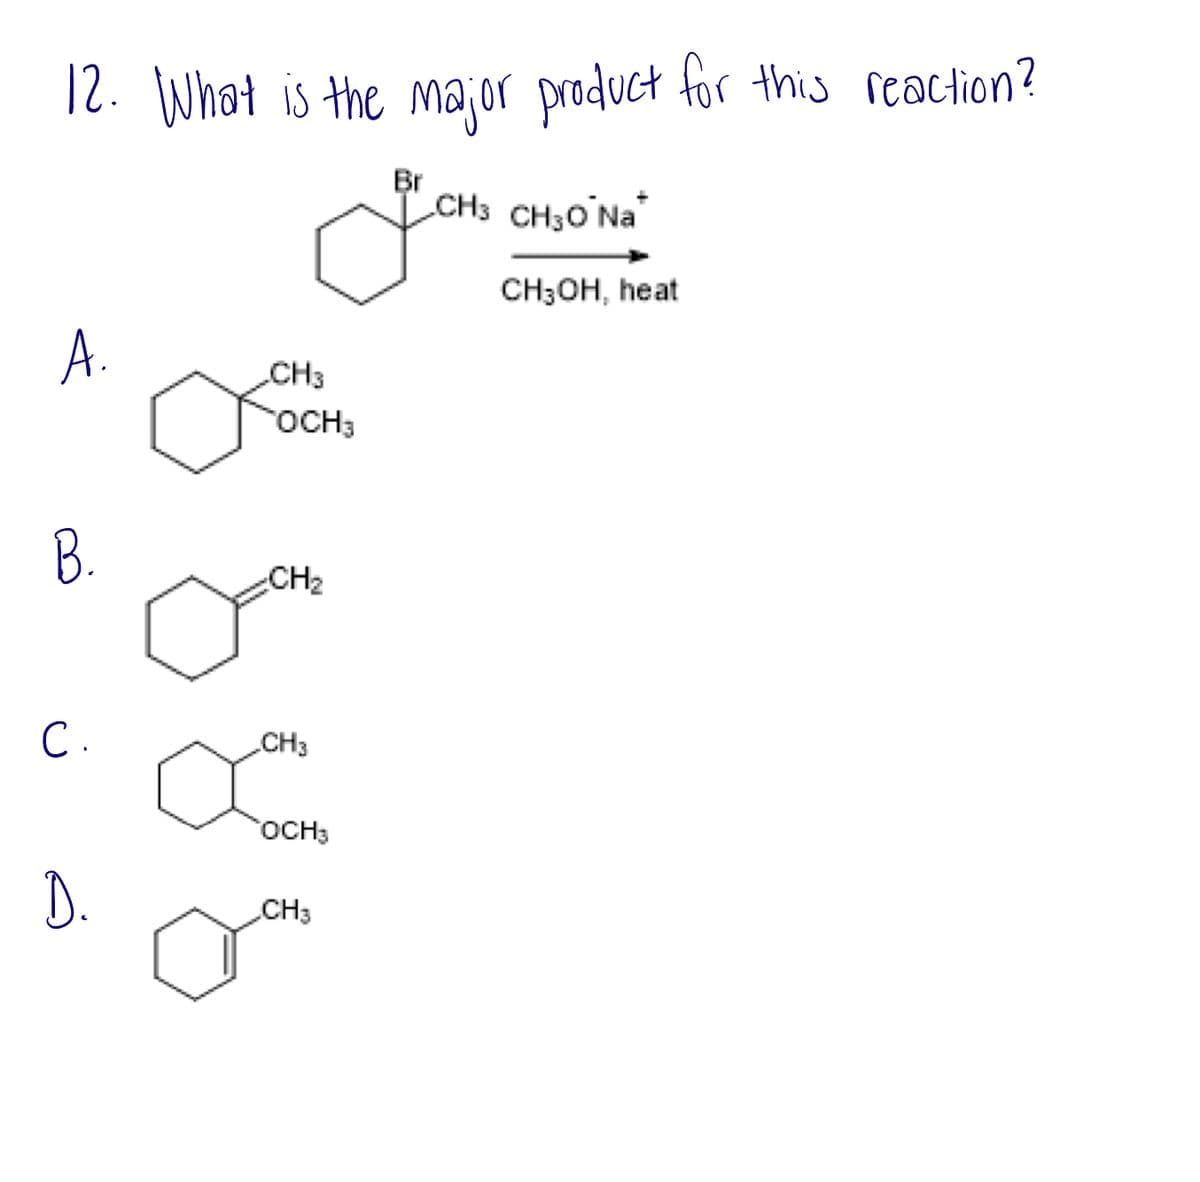 12. What is the major product for this reaction?
Br
ď
A.
B.
C.
D.
CH3
OCH3
-CH₂
CH3
OCH3
CH3
CH3 CH30 Na
CH3OH, heat